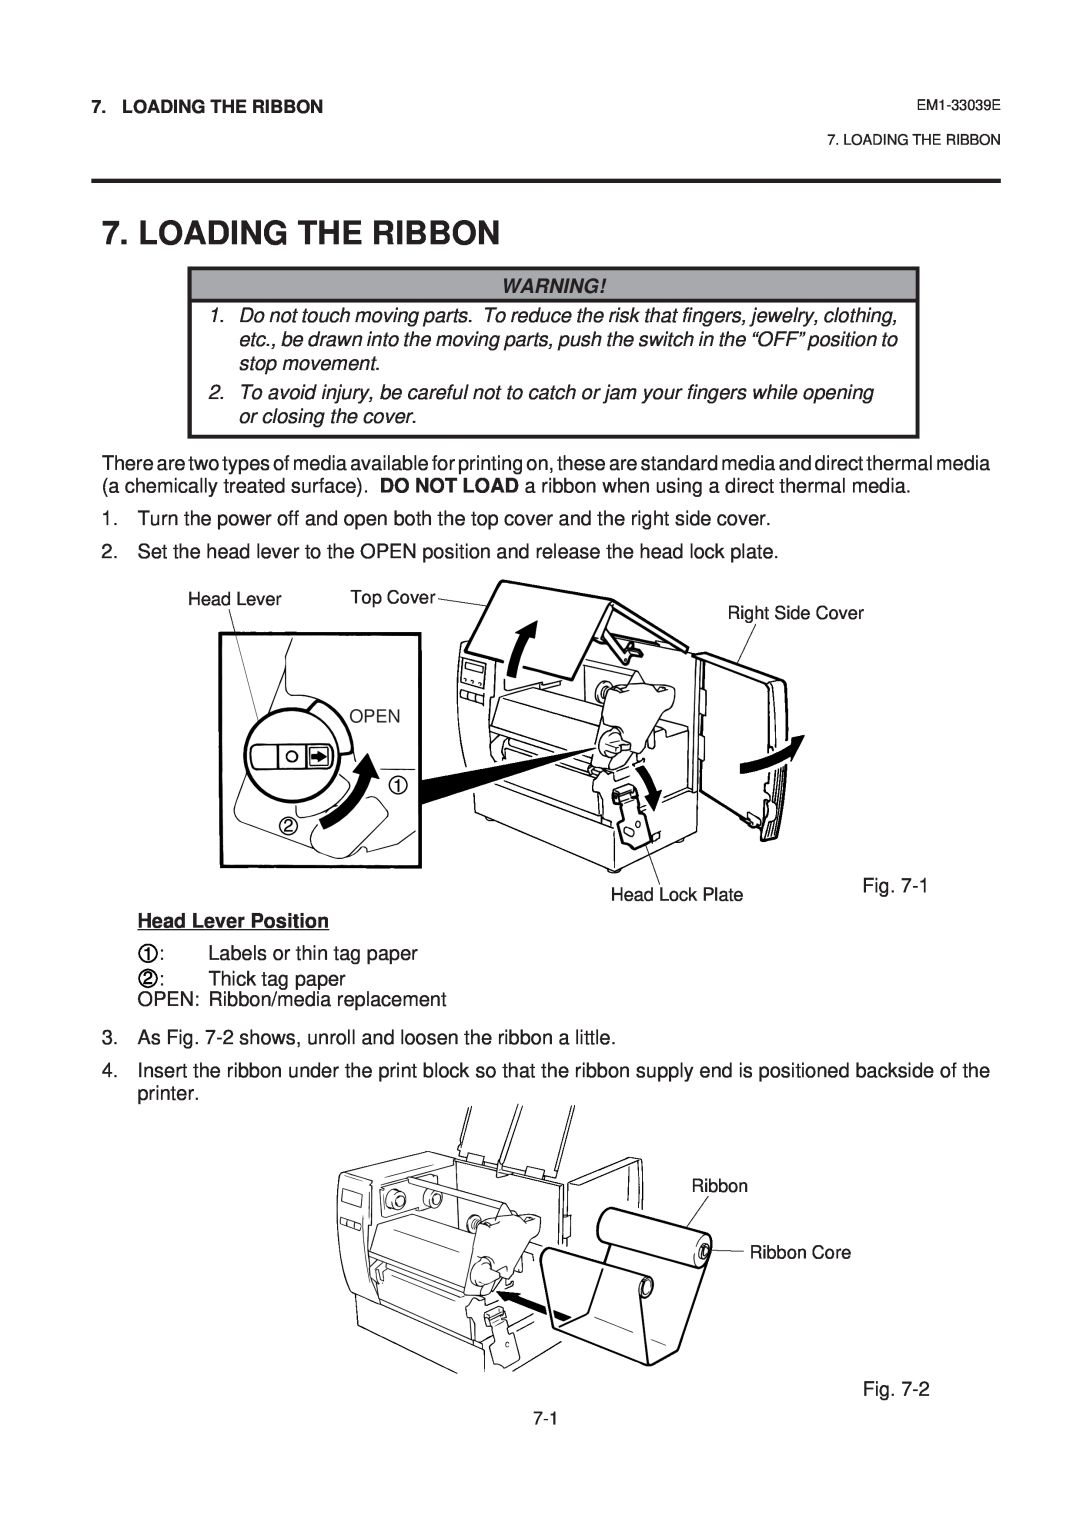 Toshiba B-870 SERIES, EM1-33039EE owner manual Loading The Ribbon, Head Lever Position 